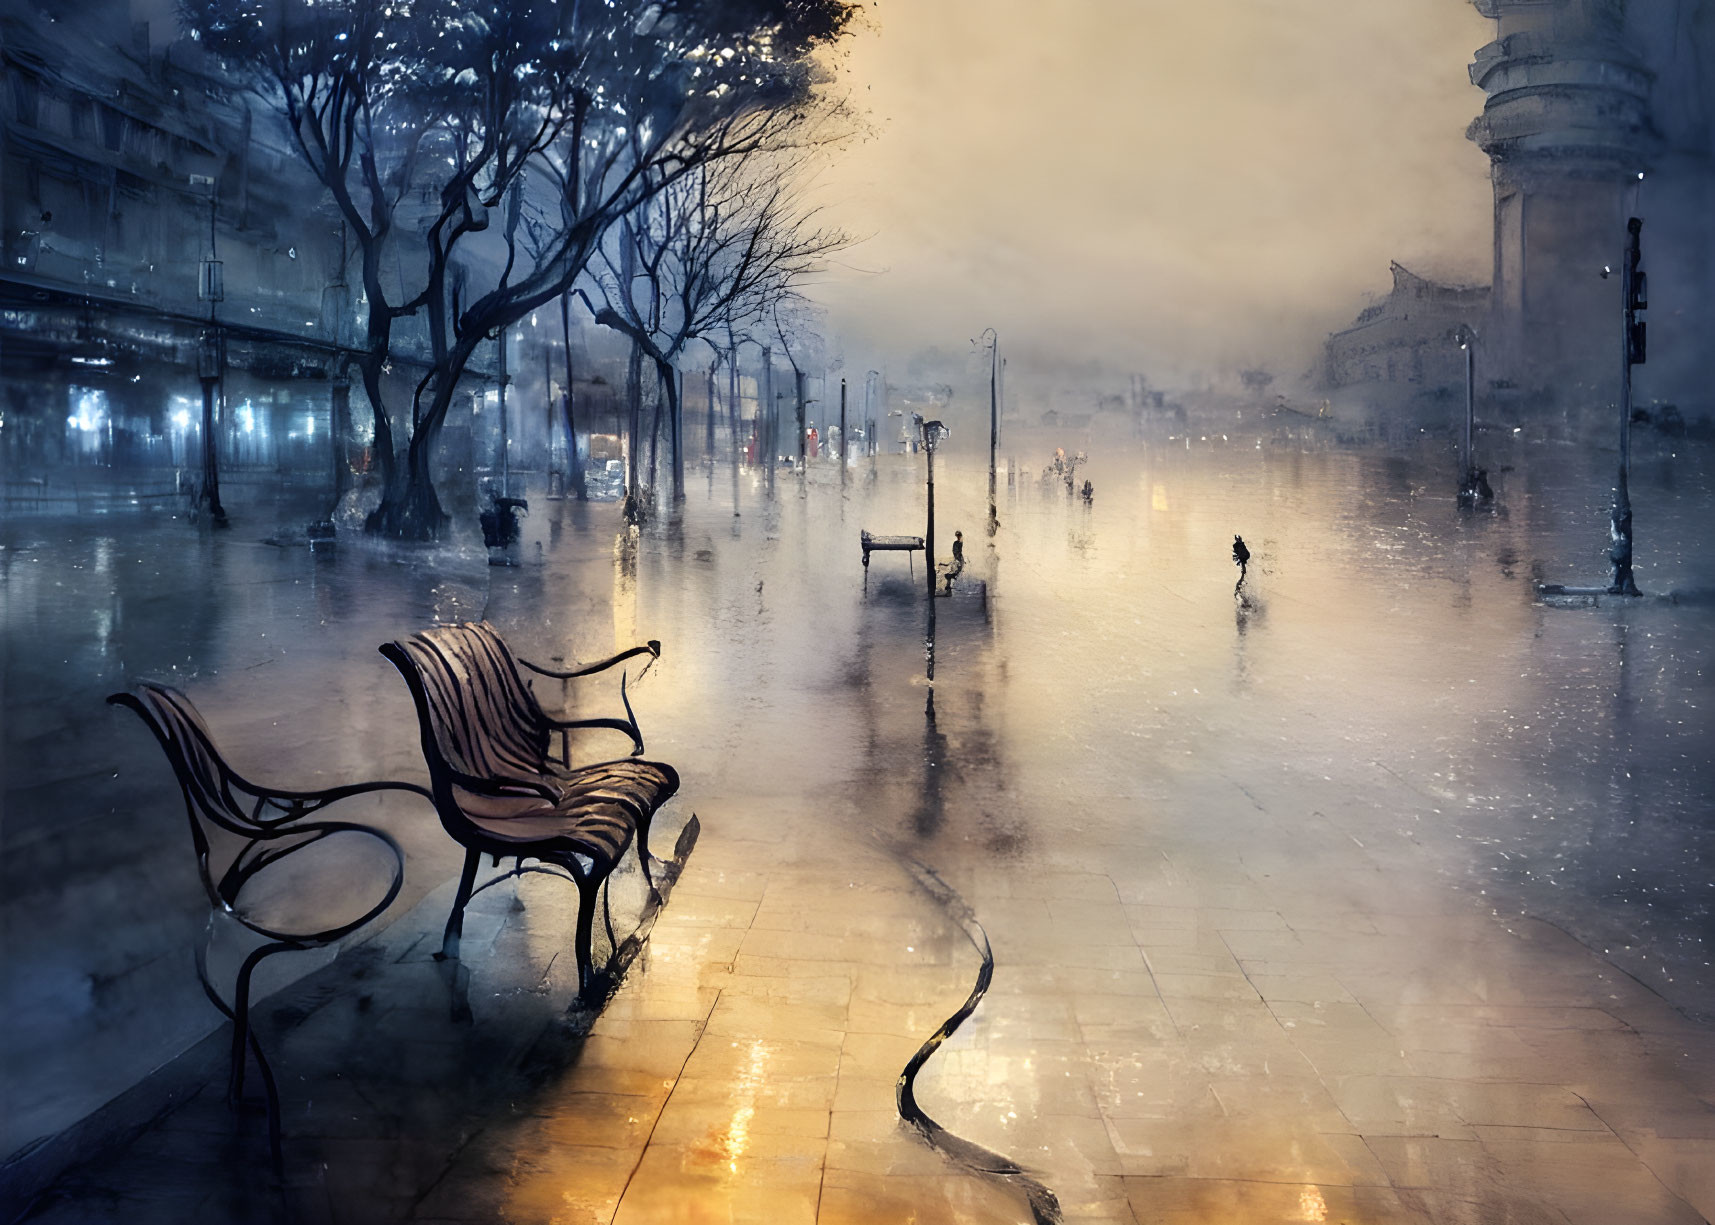 Misty city scene with wet pavement and silhouettes at twilight